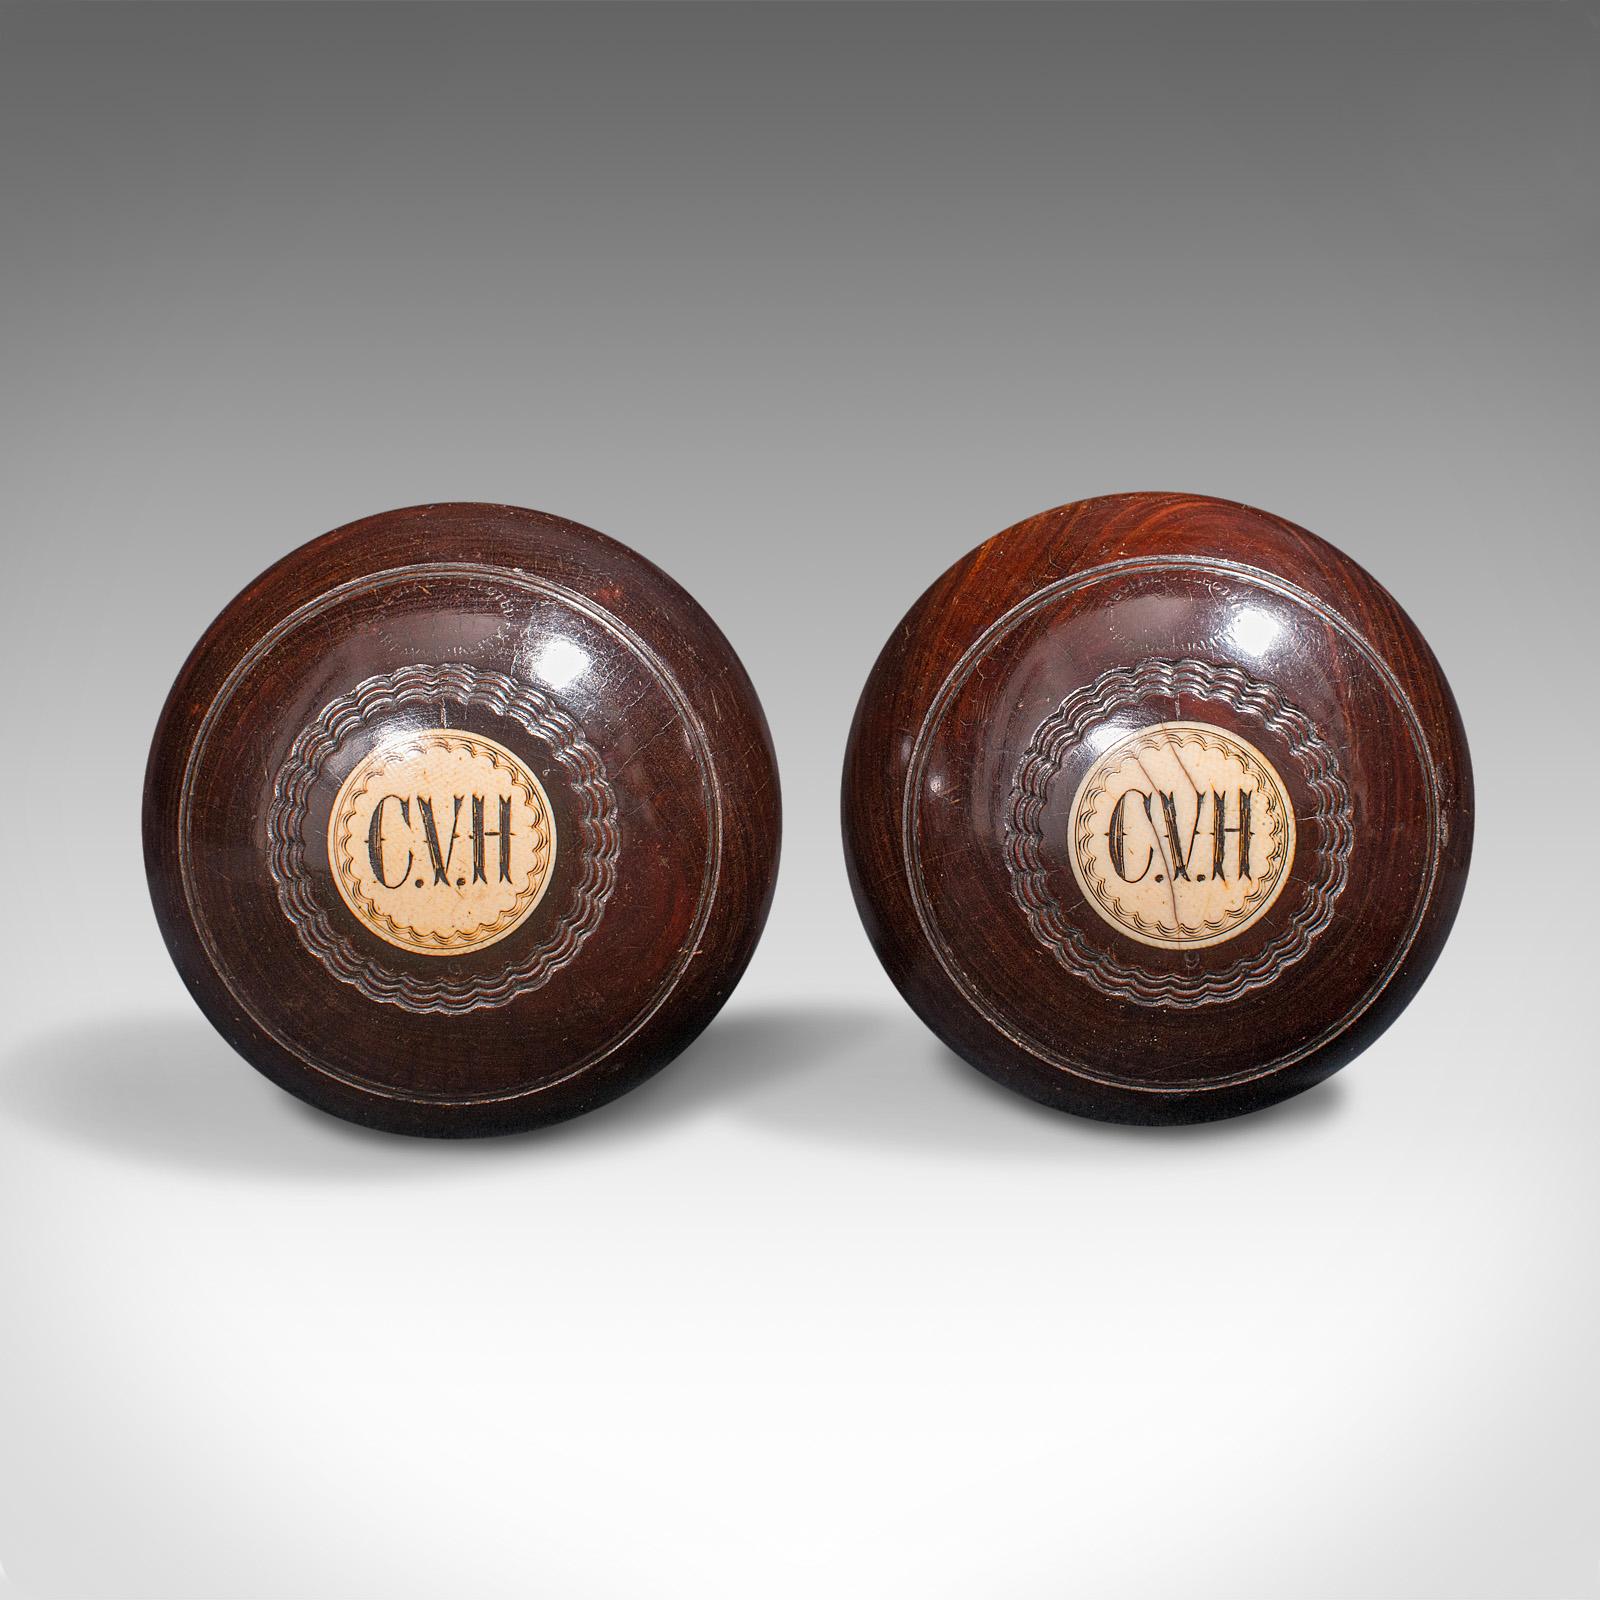 This is a pair of vintage bowling woods. A Scottish, hardwood lawn bowls ball by Thomas Taylor of Glasgow, dating to the mid 20th century, circa 1935.

Fascinating pair of numbered and monogrammed woods
Displaying a desirable aged and play-worn